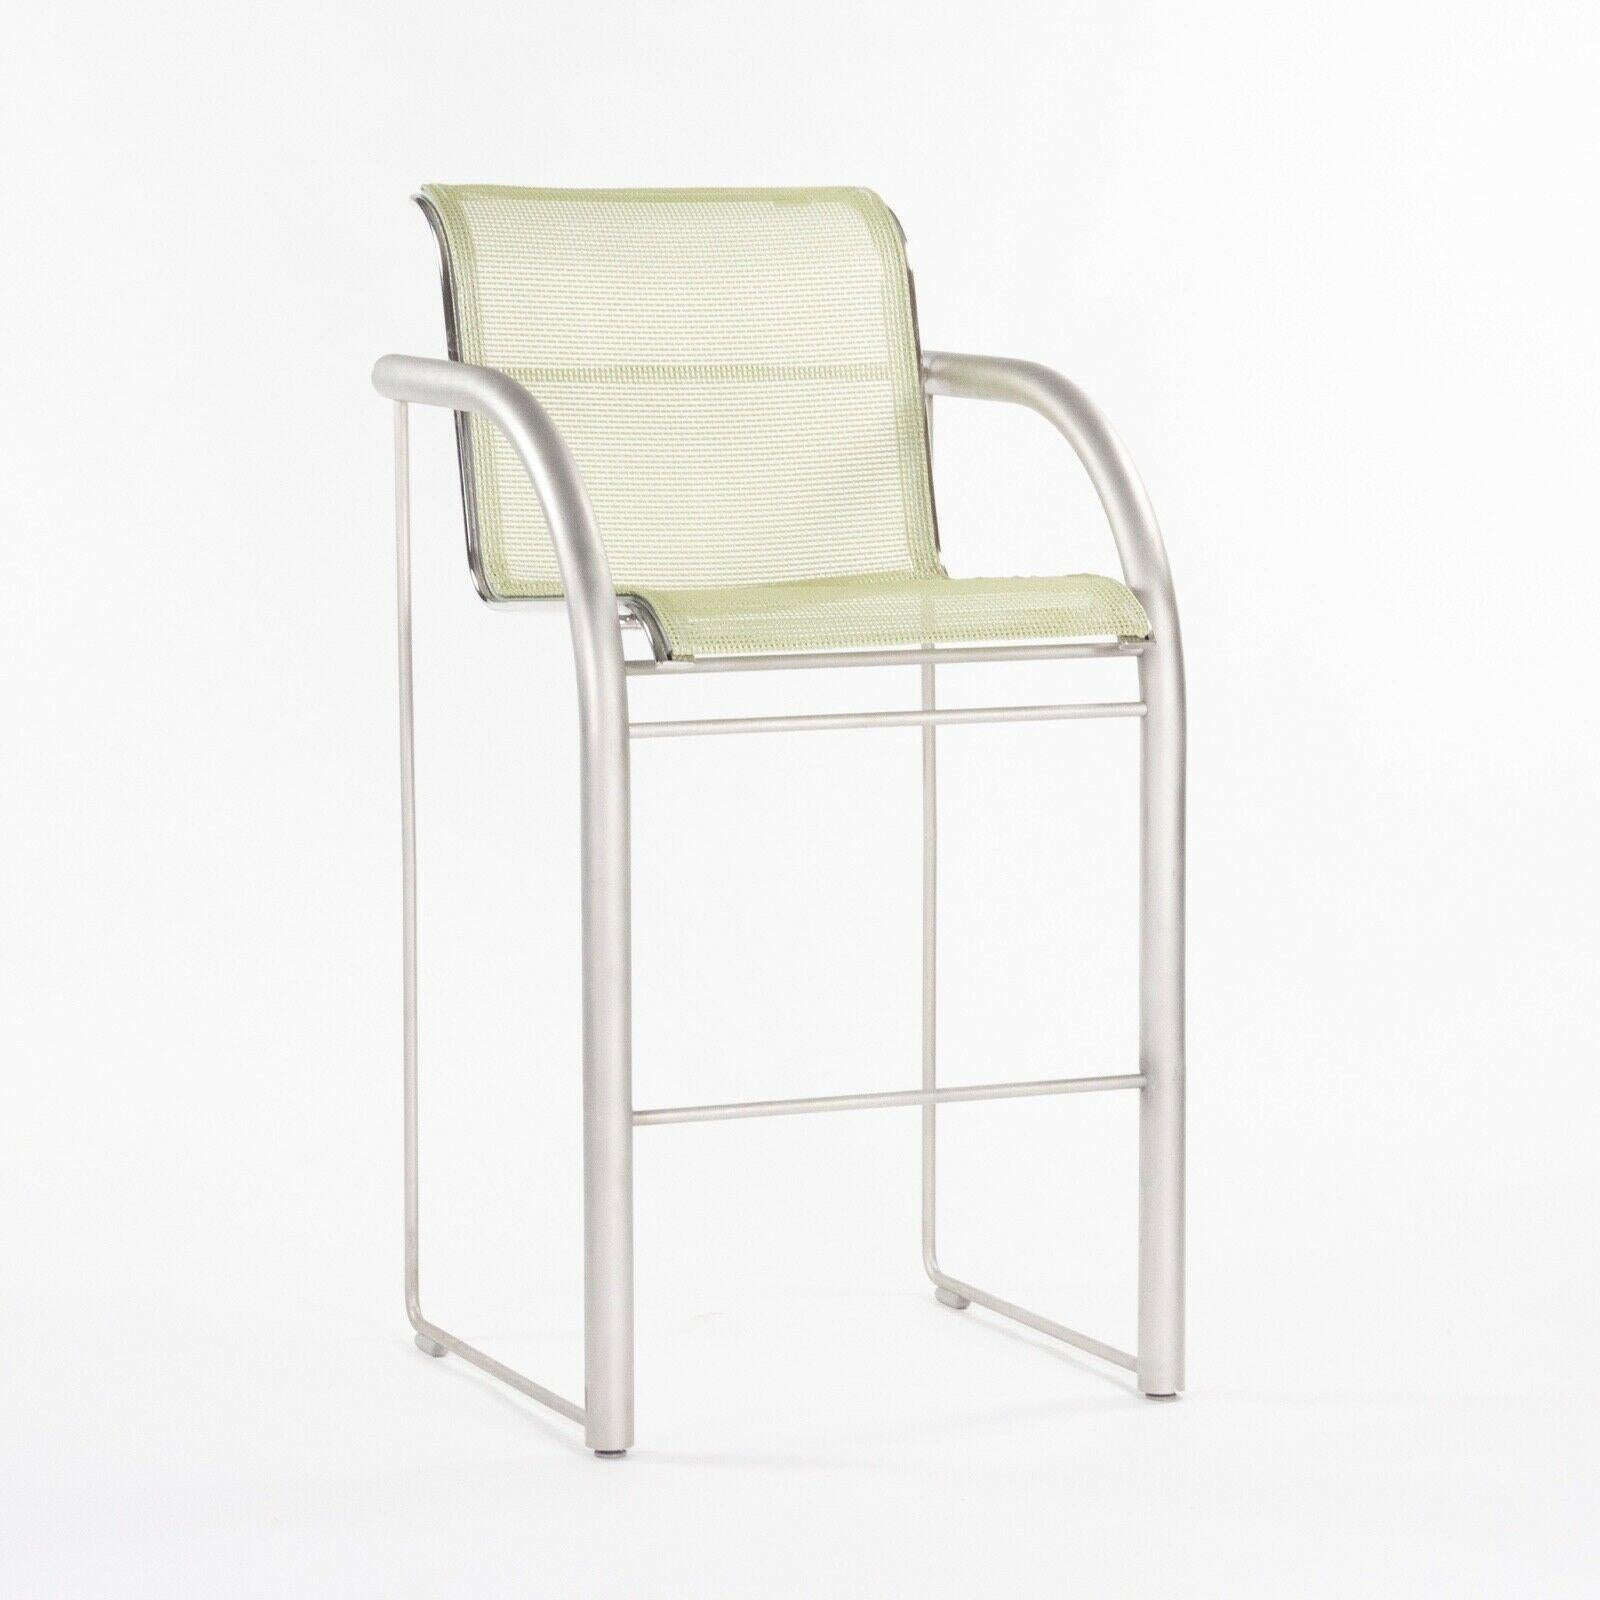 Modern Prototype Richard Schultz 2002 Collection Stainless Bar Stool with Outdoor Mesh For Sale